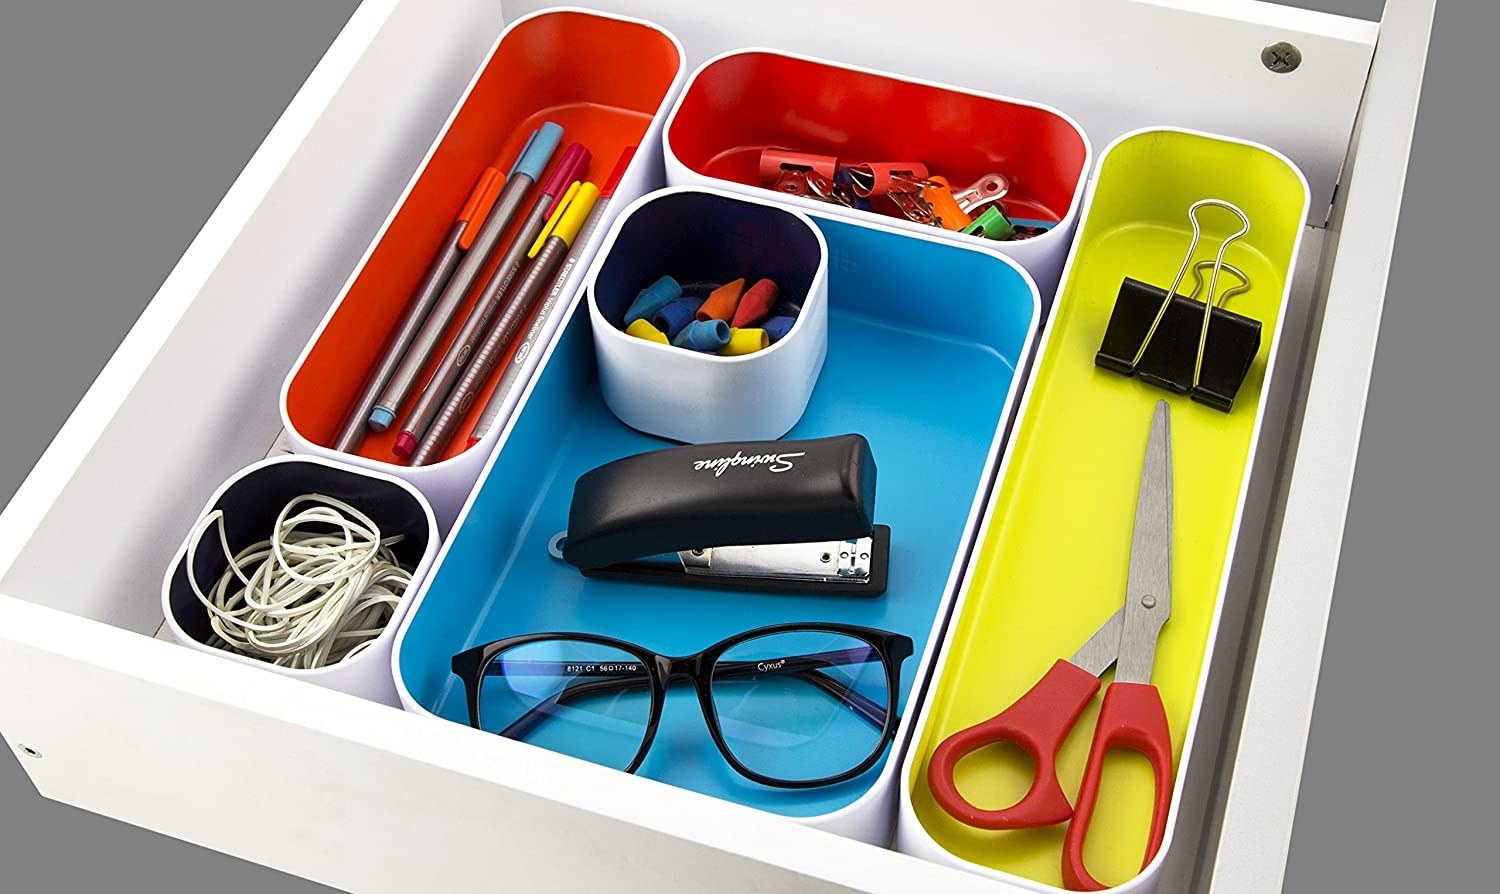 A flatlay of the Interchangeable organizers filled with office supplies